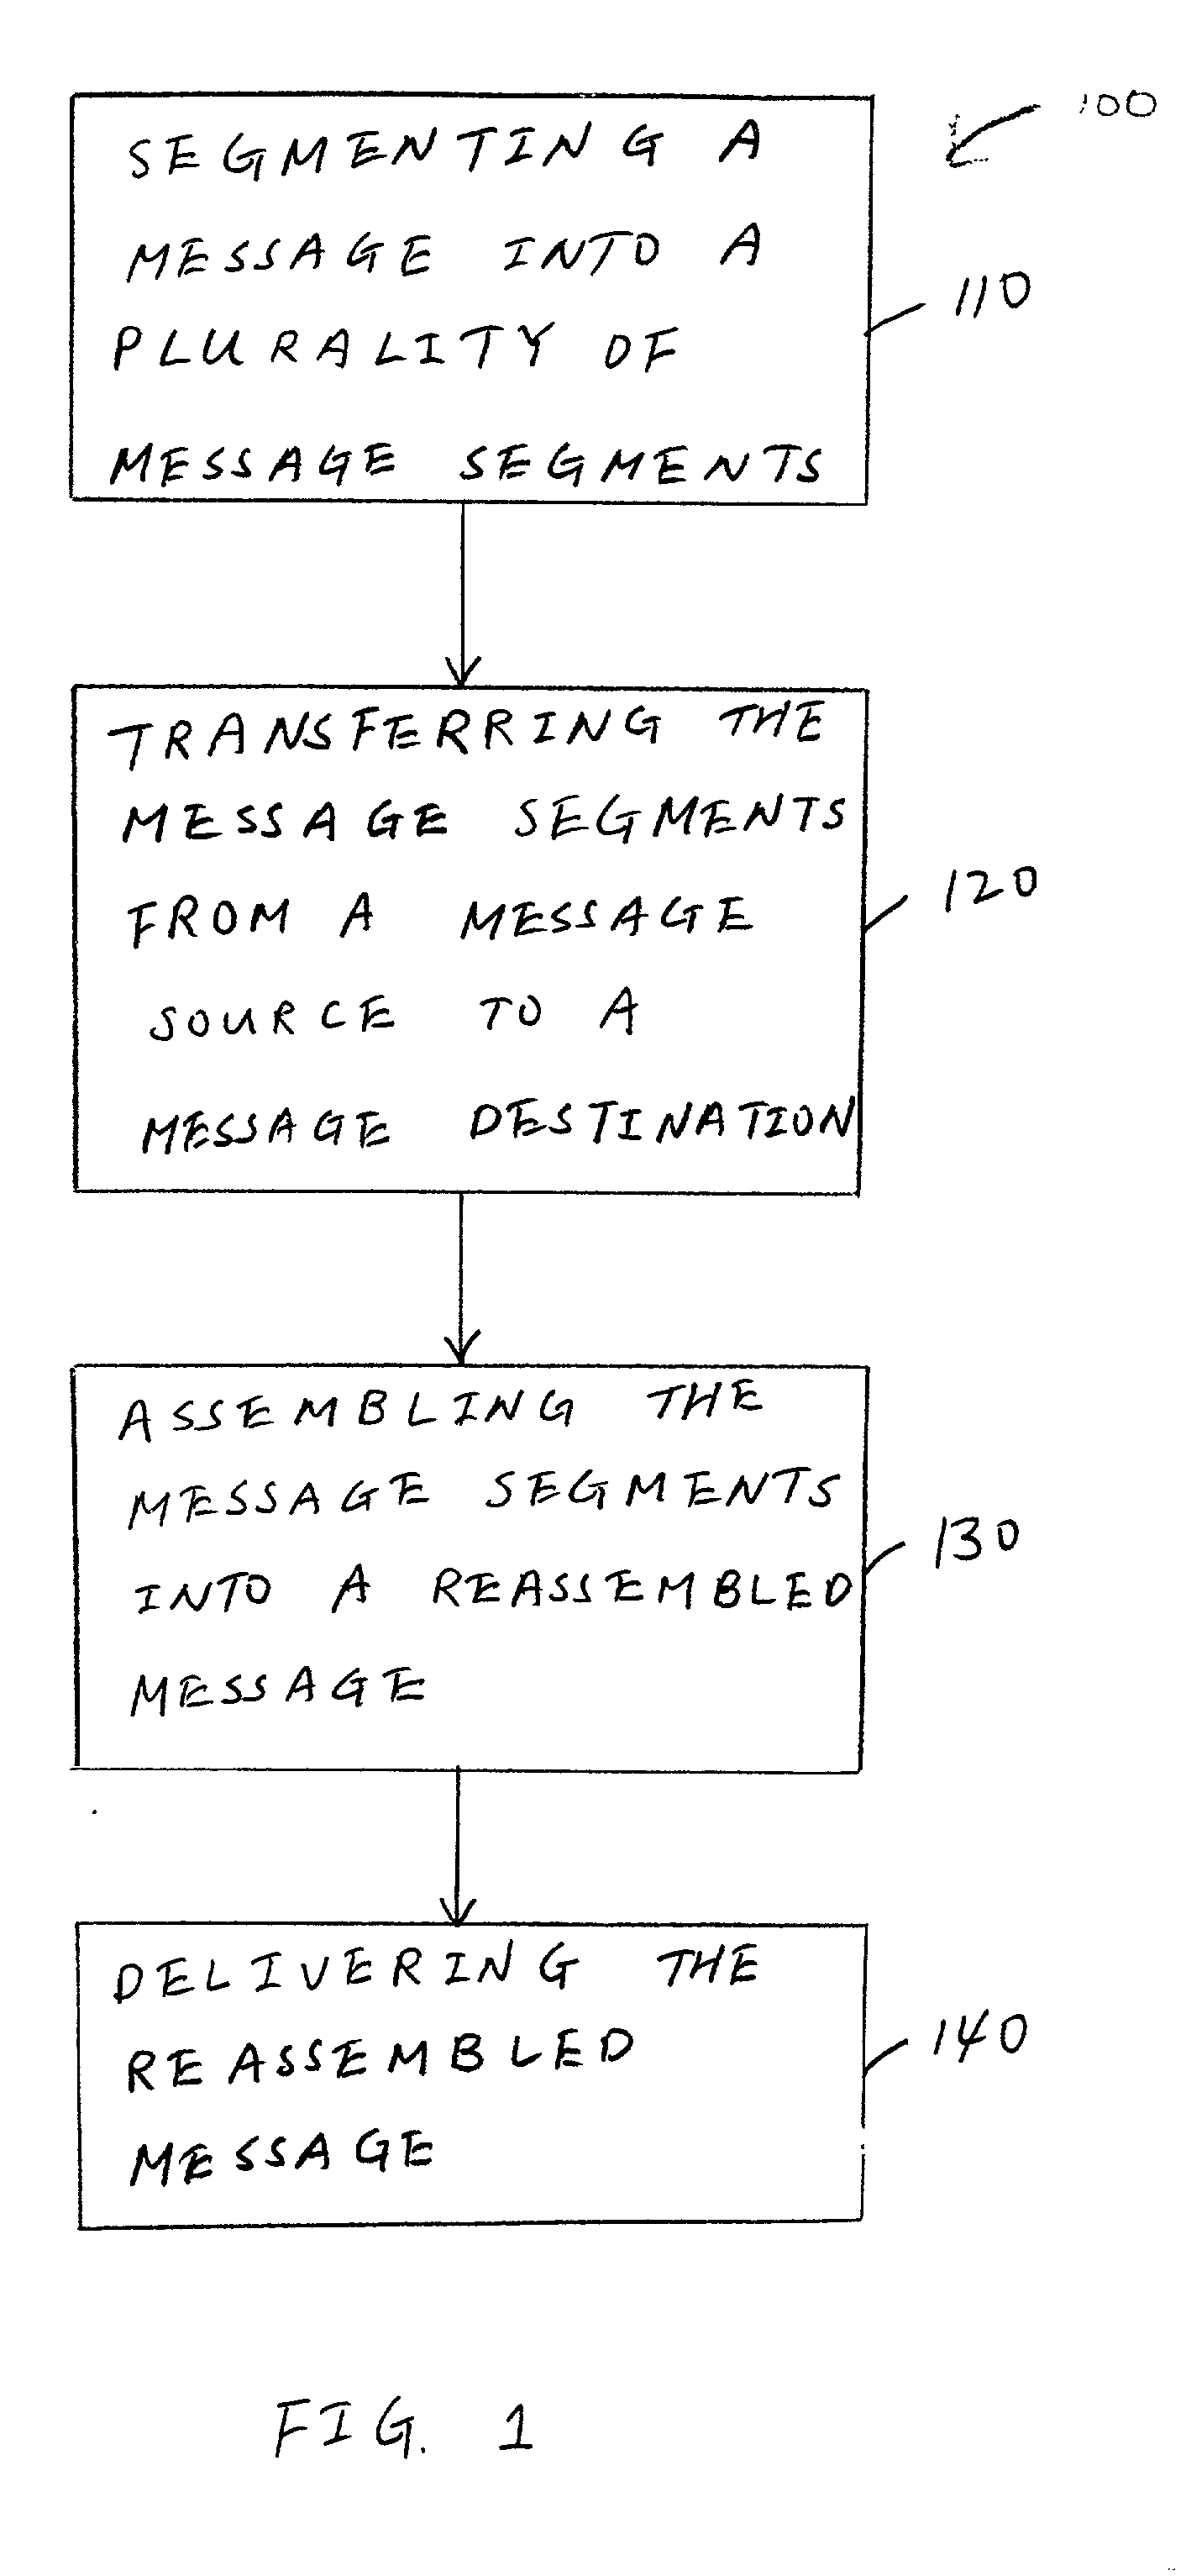 Method for the secure and timely delivery of large messages over a distributed communication network